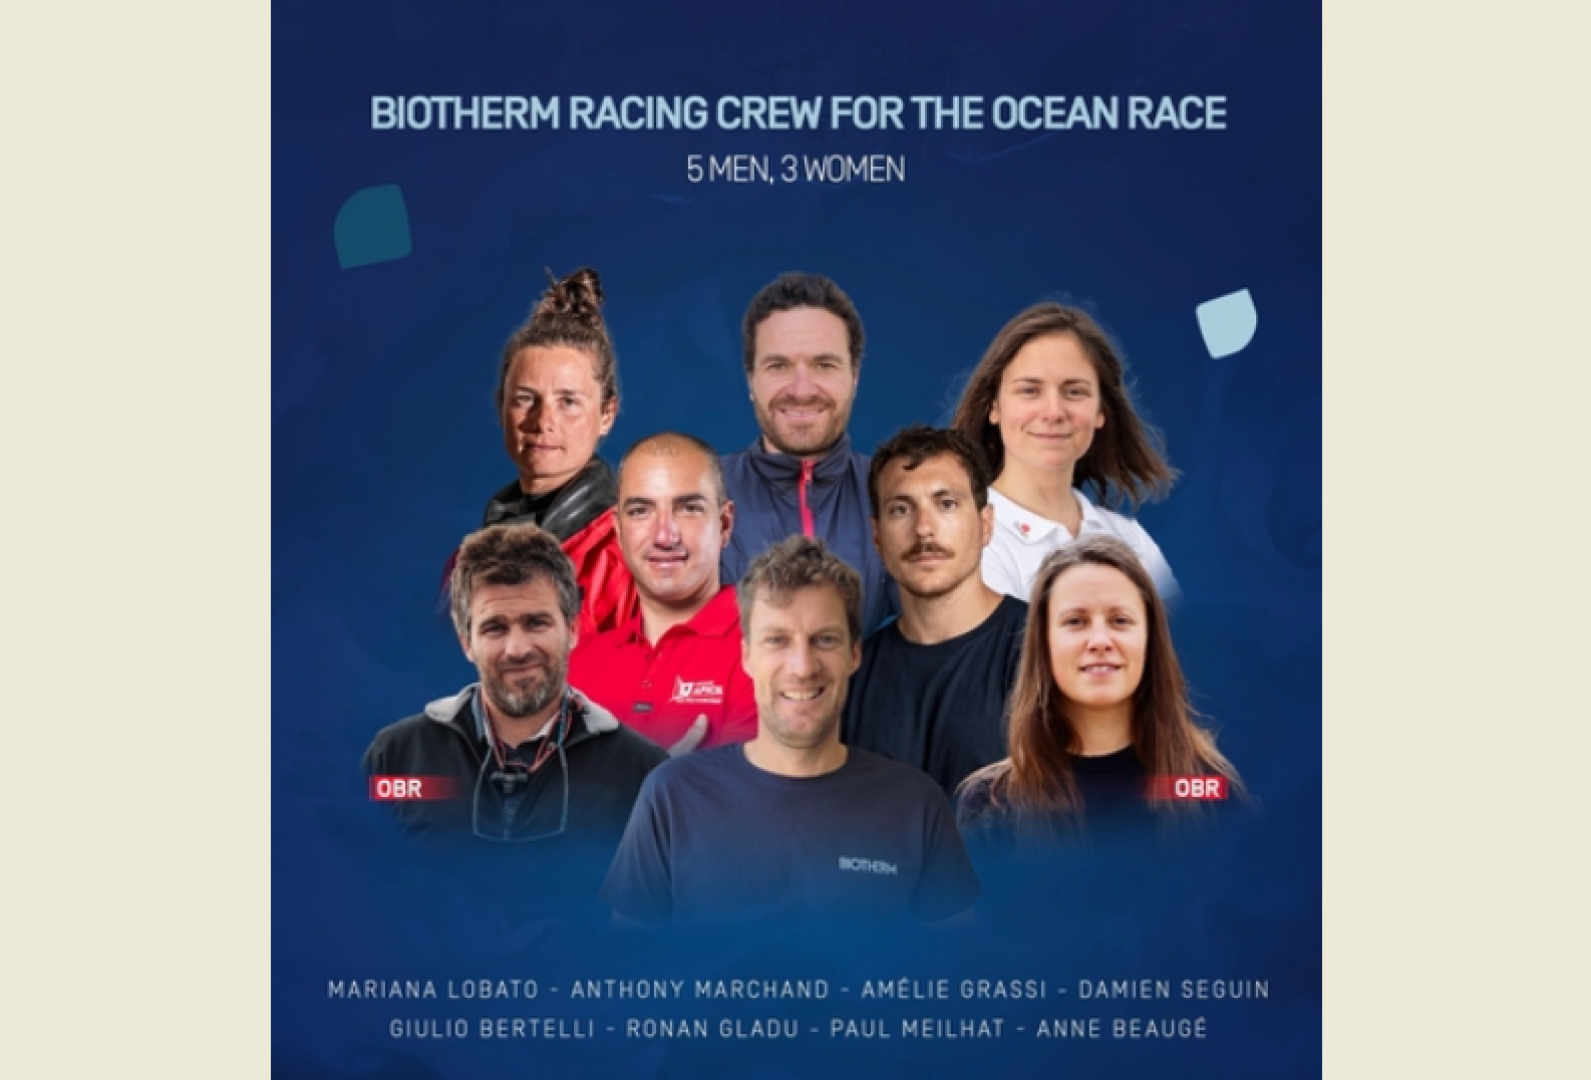 Biotherm skipper Paul Meilhat unveils a multinational crew for The Ocean Race